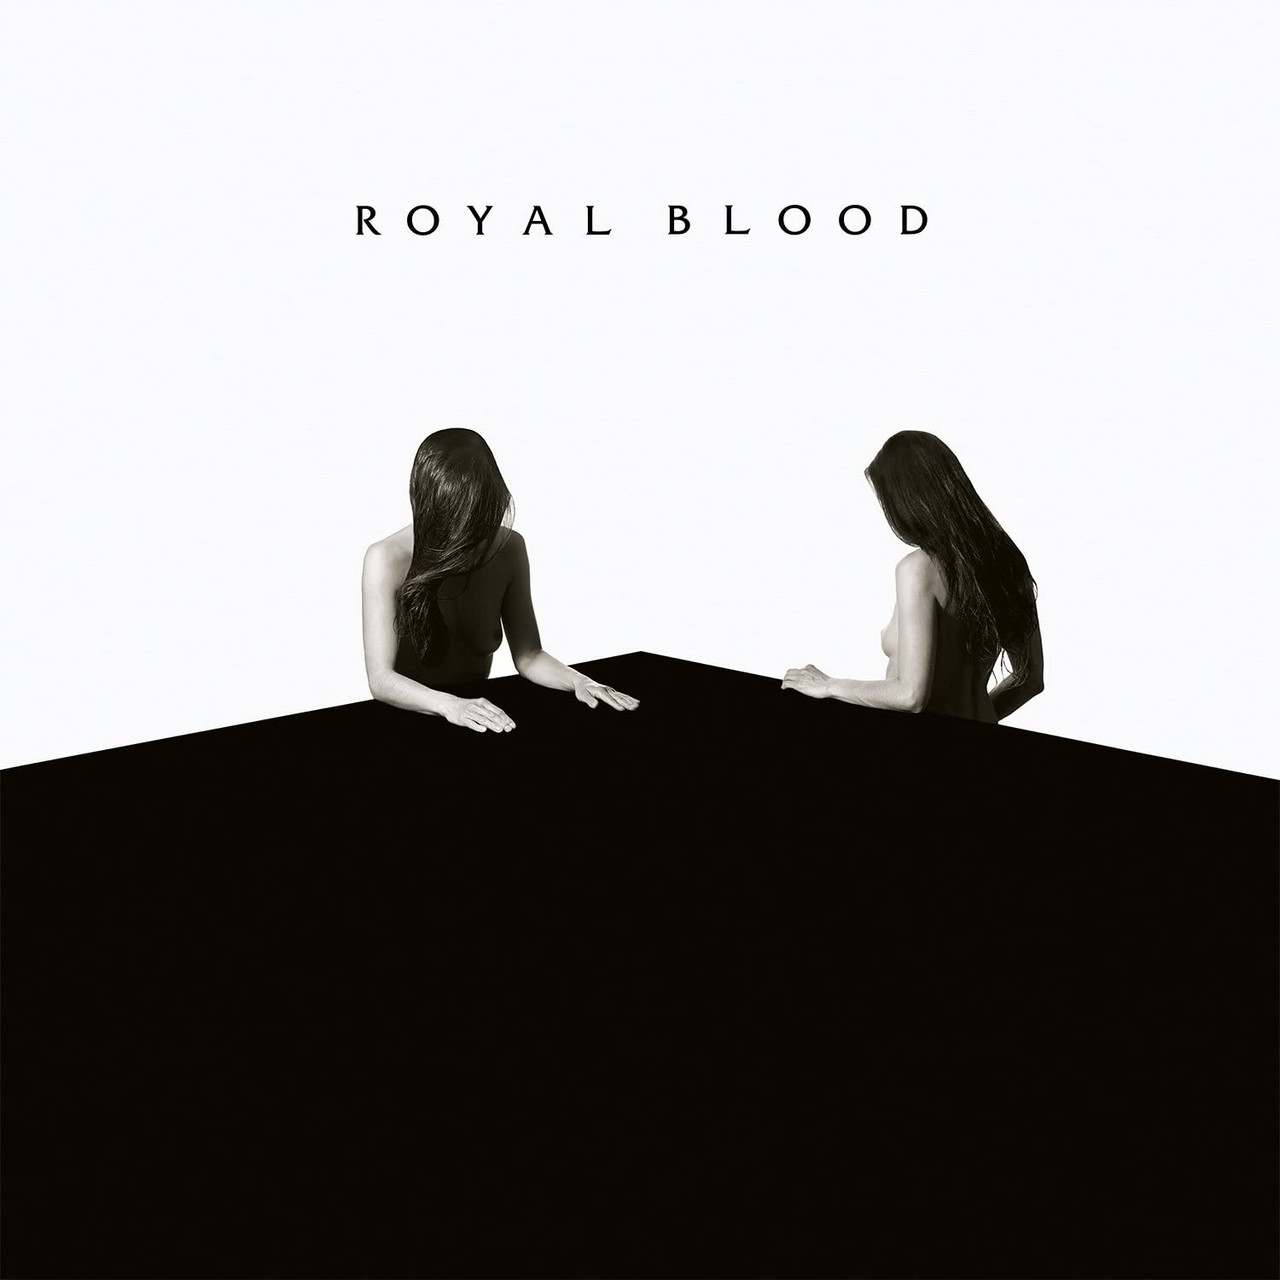 Royal Blood - How Did We Get So Dark, album cover